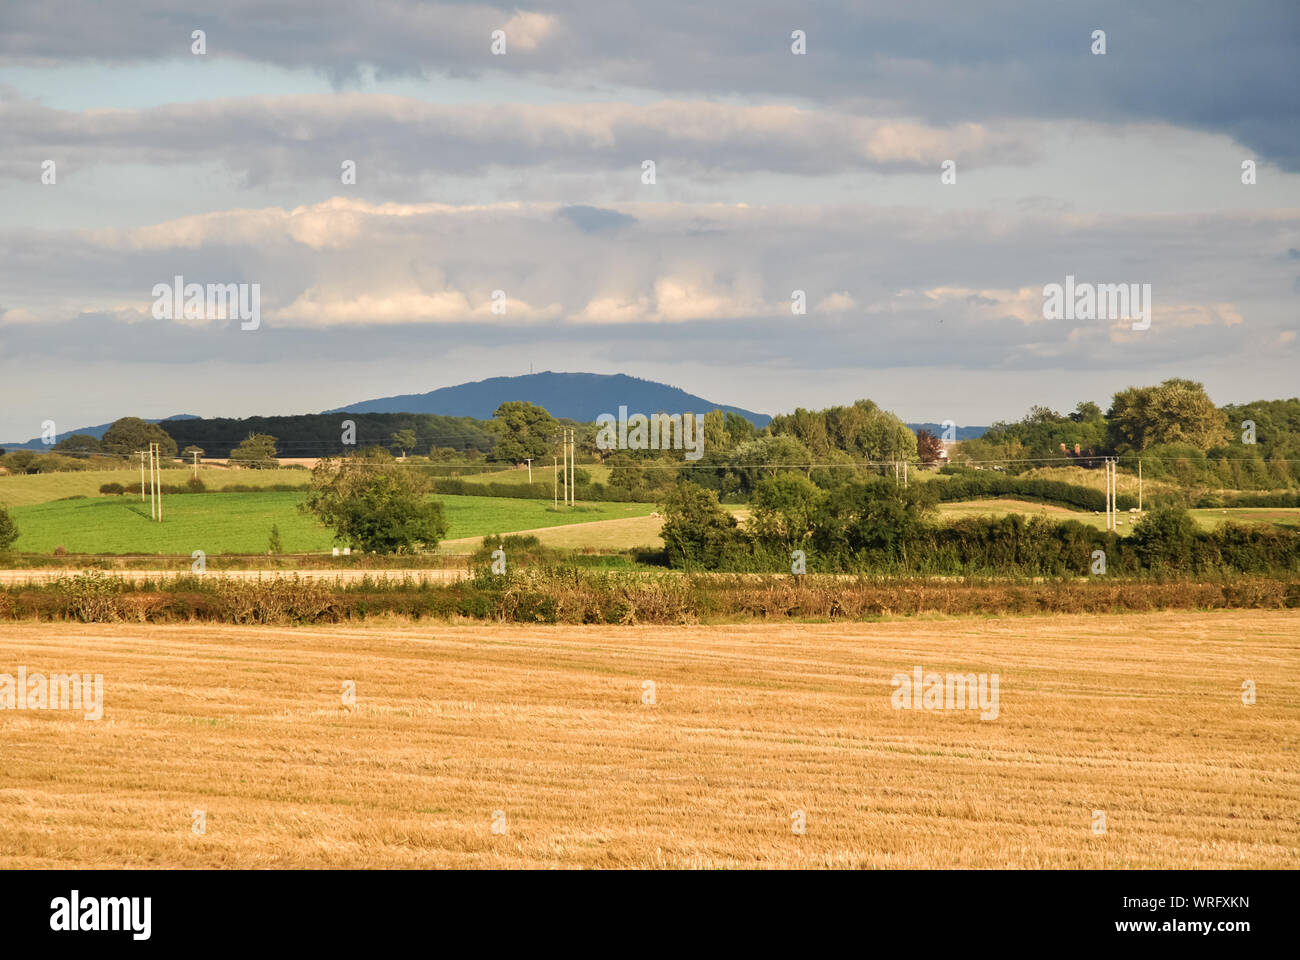 A rural scene showing the Wrekin hill in the background, Shropshire, UK Stock Photo